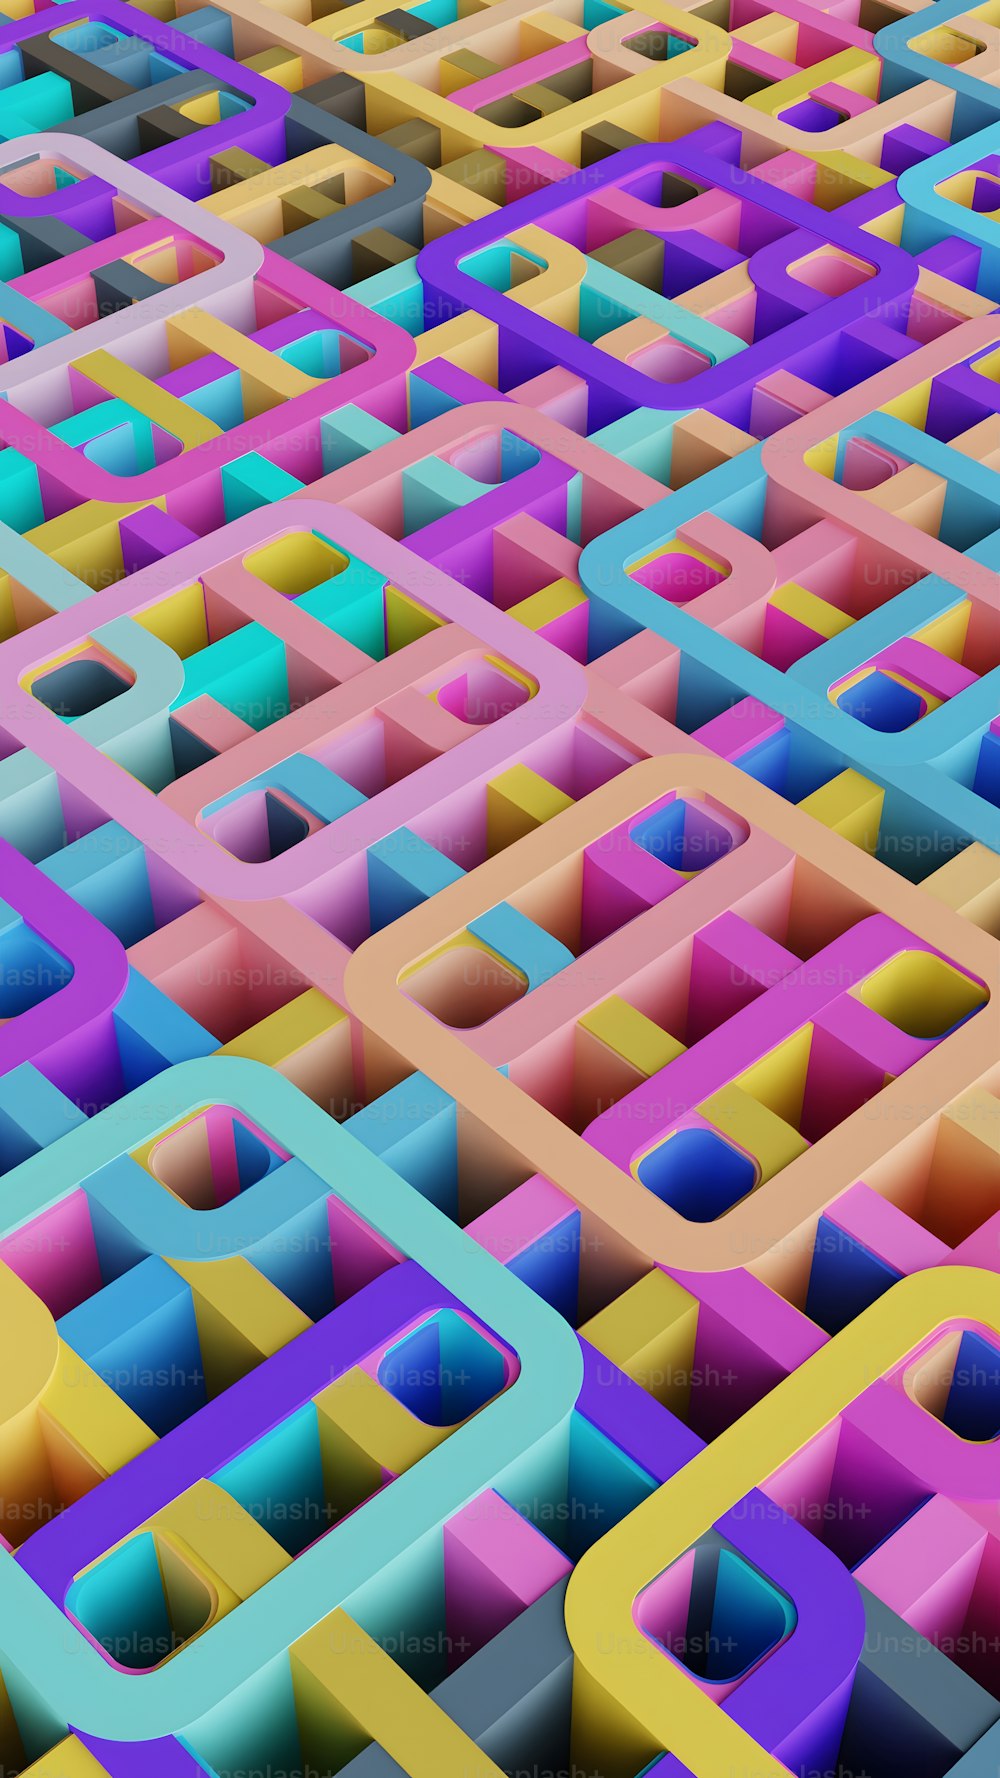 a very colorful pattern of squares and rectangles